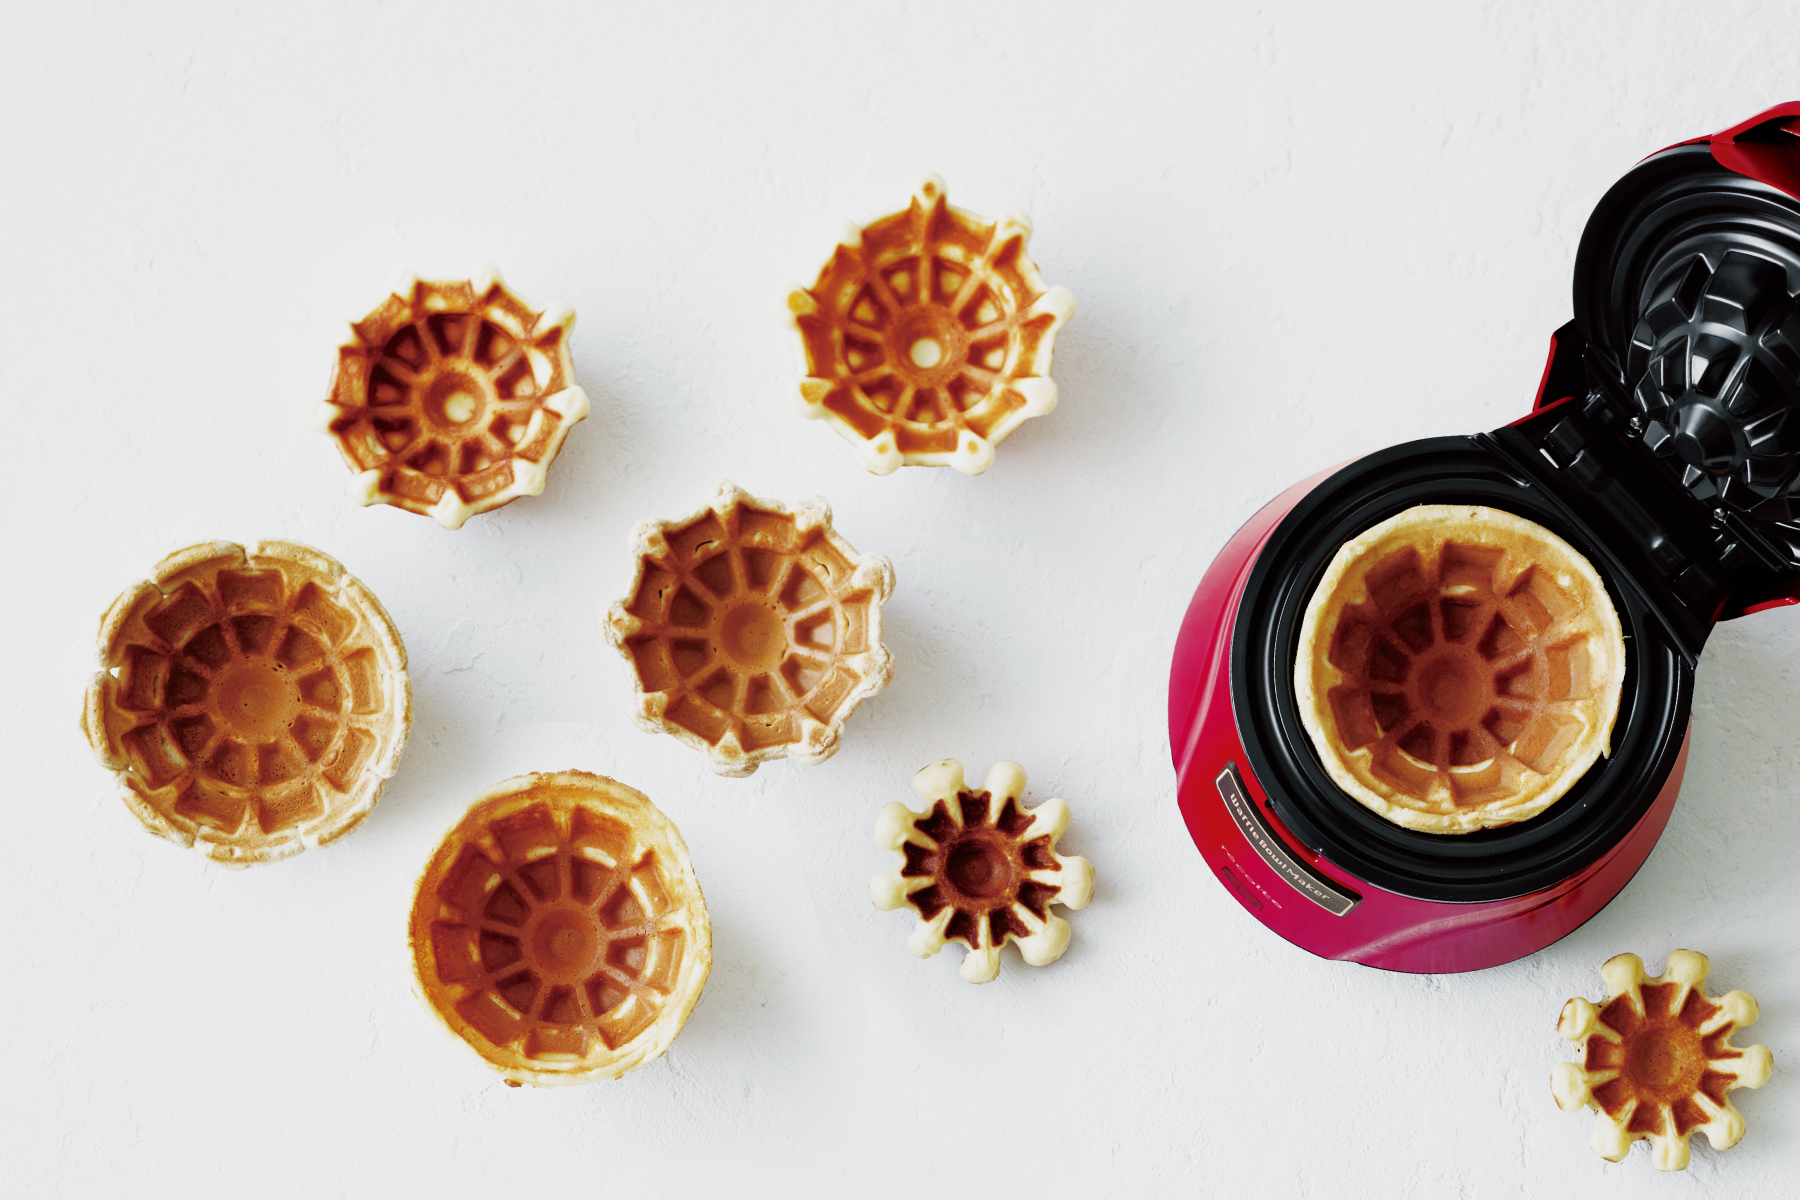 Waffle Bowl Maker, Products